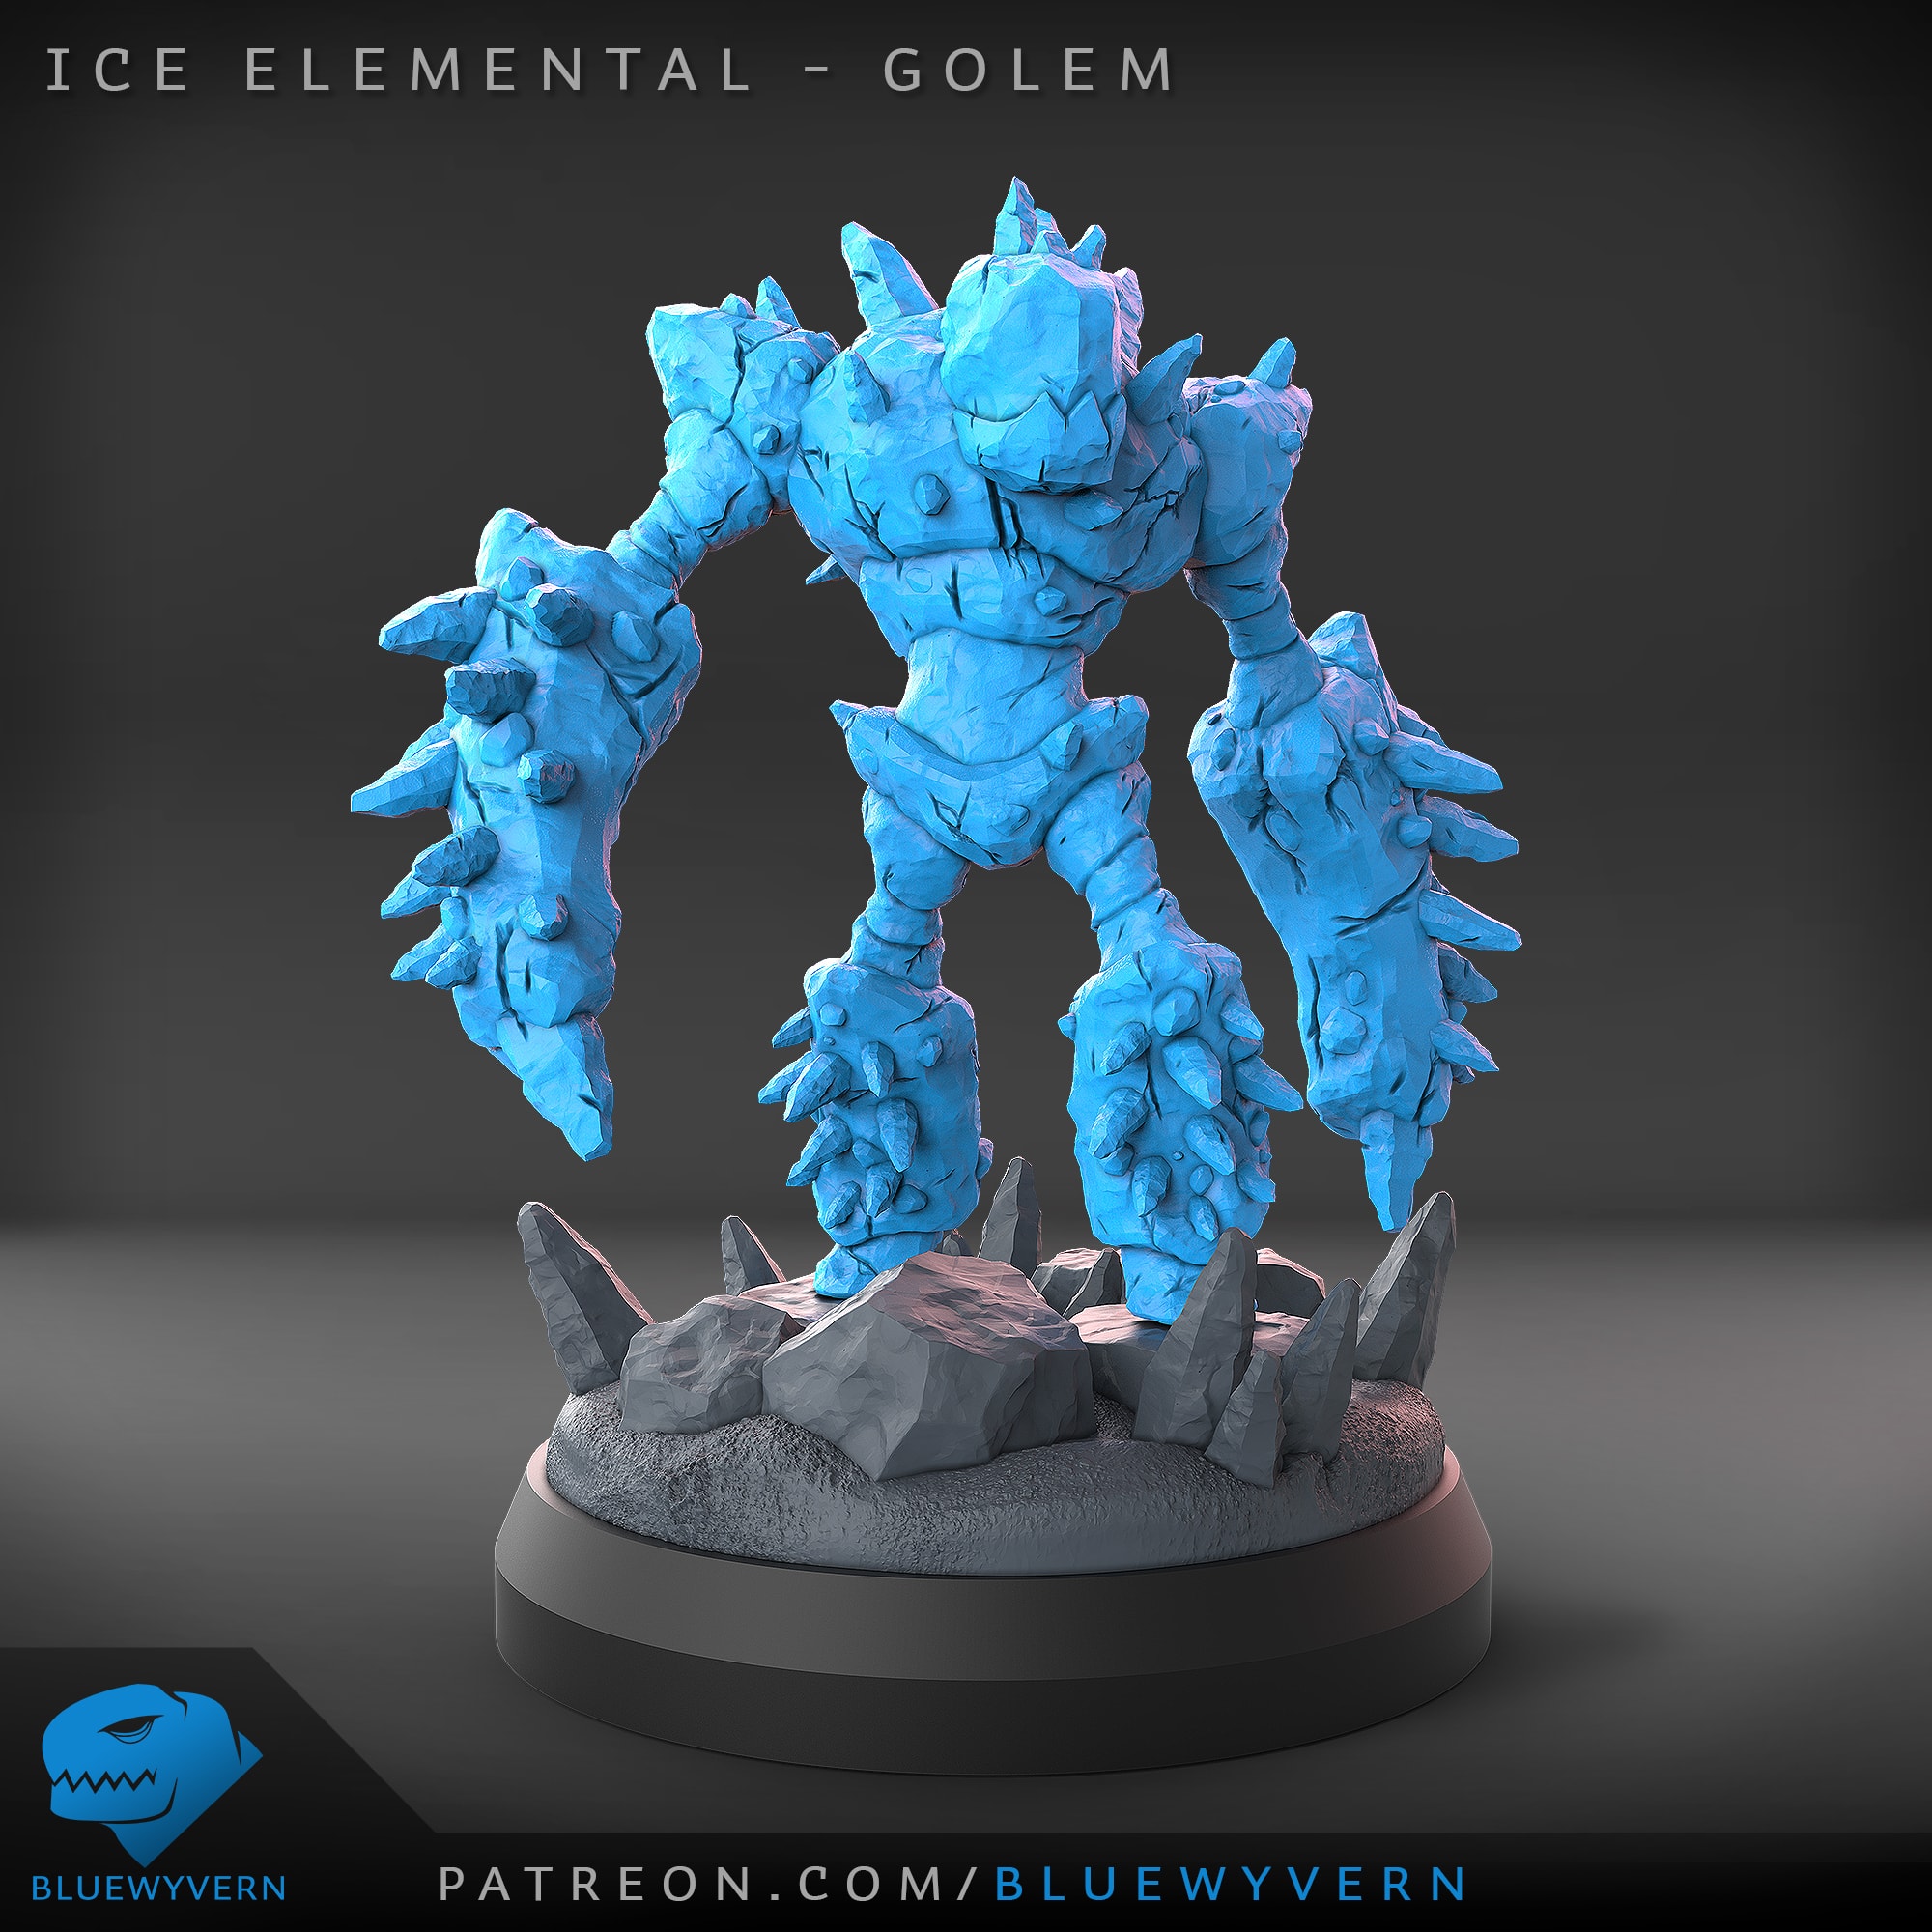 3D PrintedResin Miniature D&D Dungeons and Dragons Pathfinders Ice and Snow Elemental Golem EC3D Icewind Dale Wilds of Wintertide